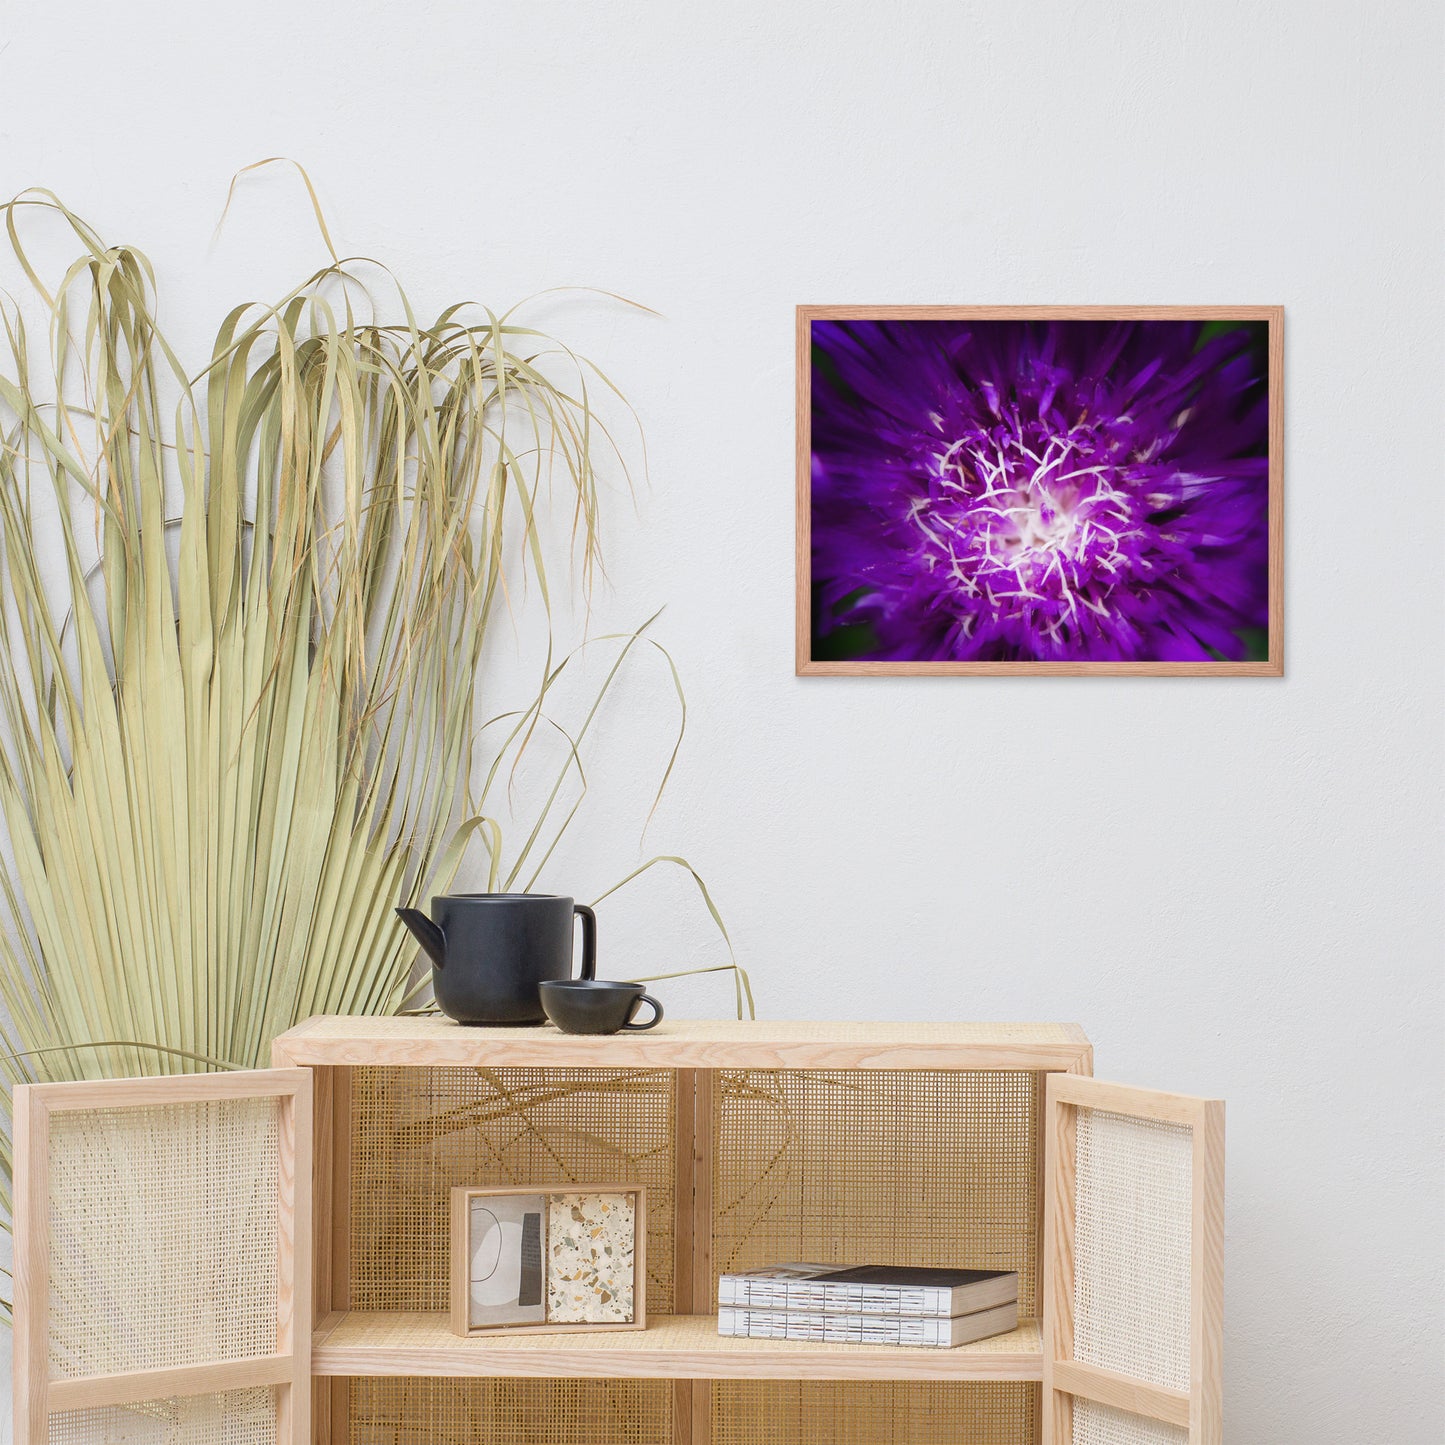 Colourful Prints For Living Room: Purple Abstract Flower - Botanical / Floral / Flora / Flowers / Nature Photograph Framed Wall Art Print - Artwork - Wall Decor